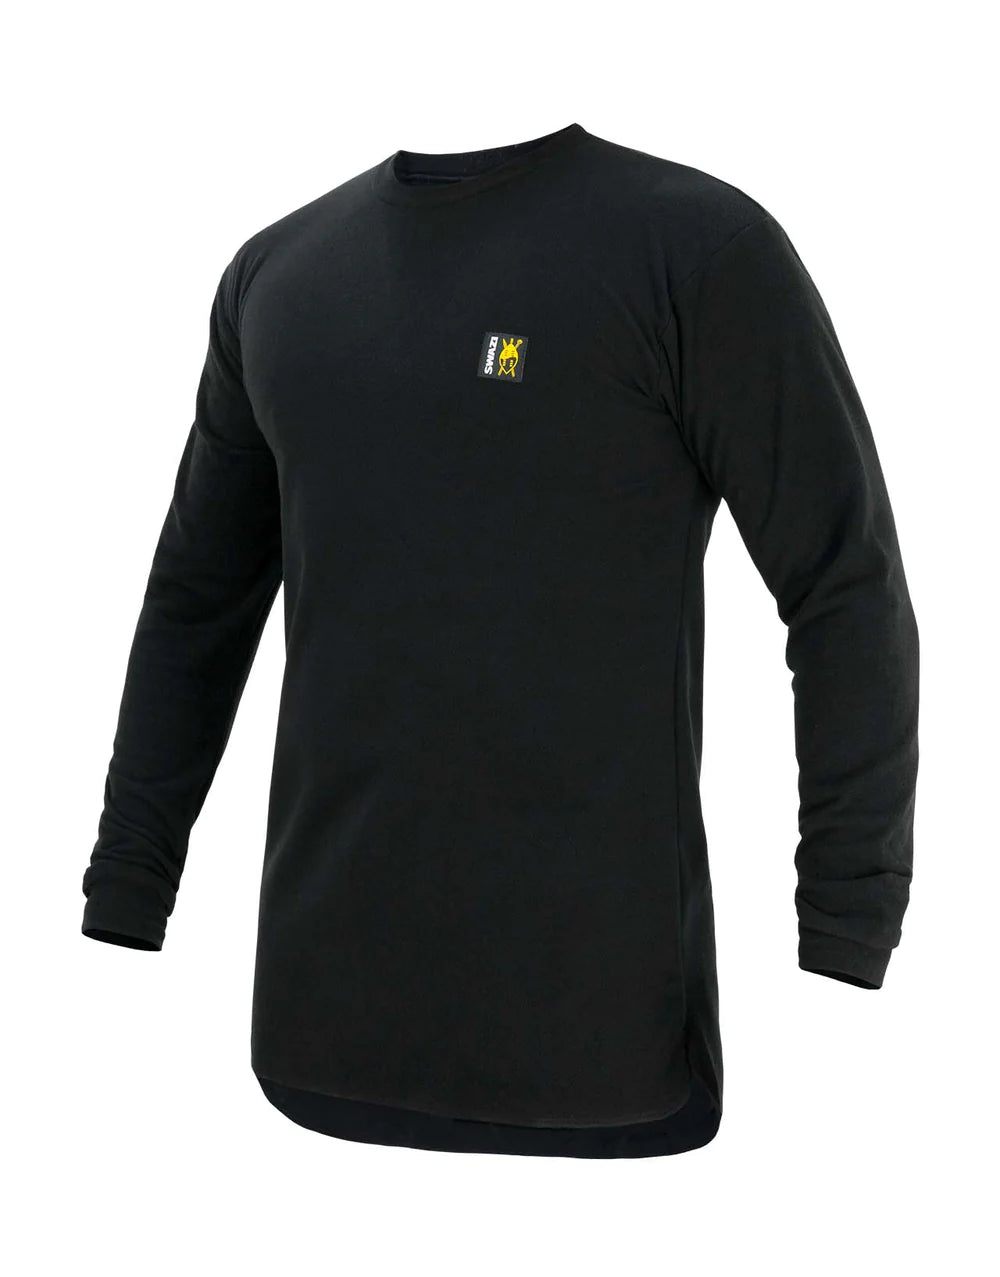 Swazi Long Sleeve Micro Top - XS / BLACK - Mansfield Hunting & Fishing - Products to prepare for Corona Virus